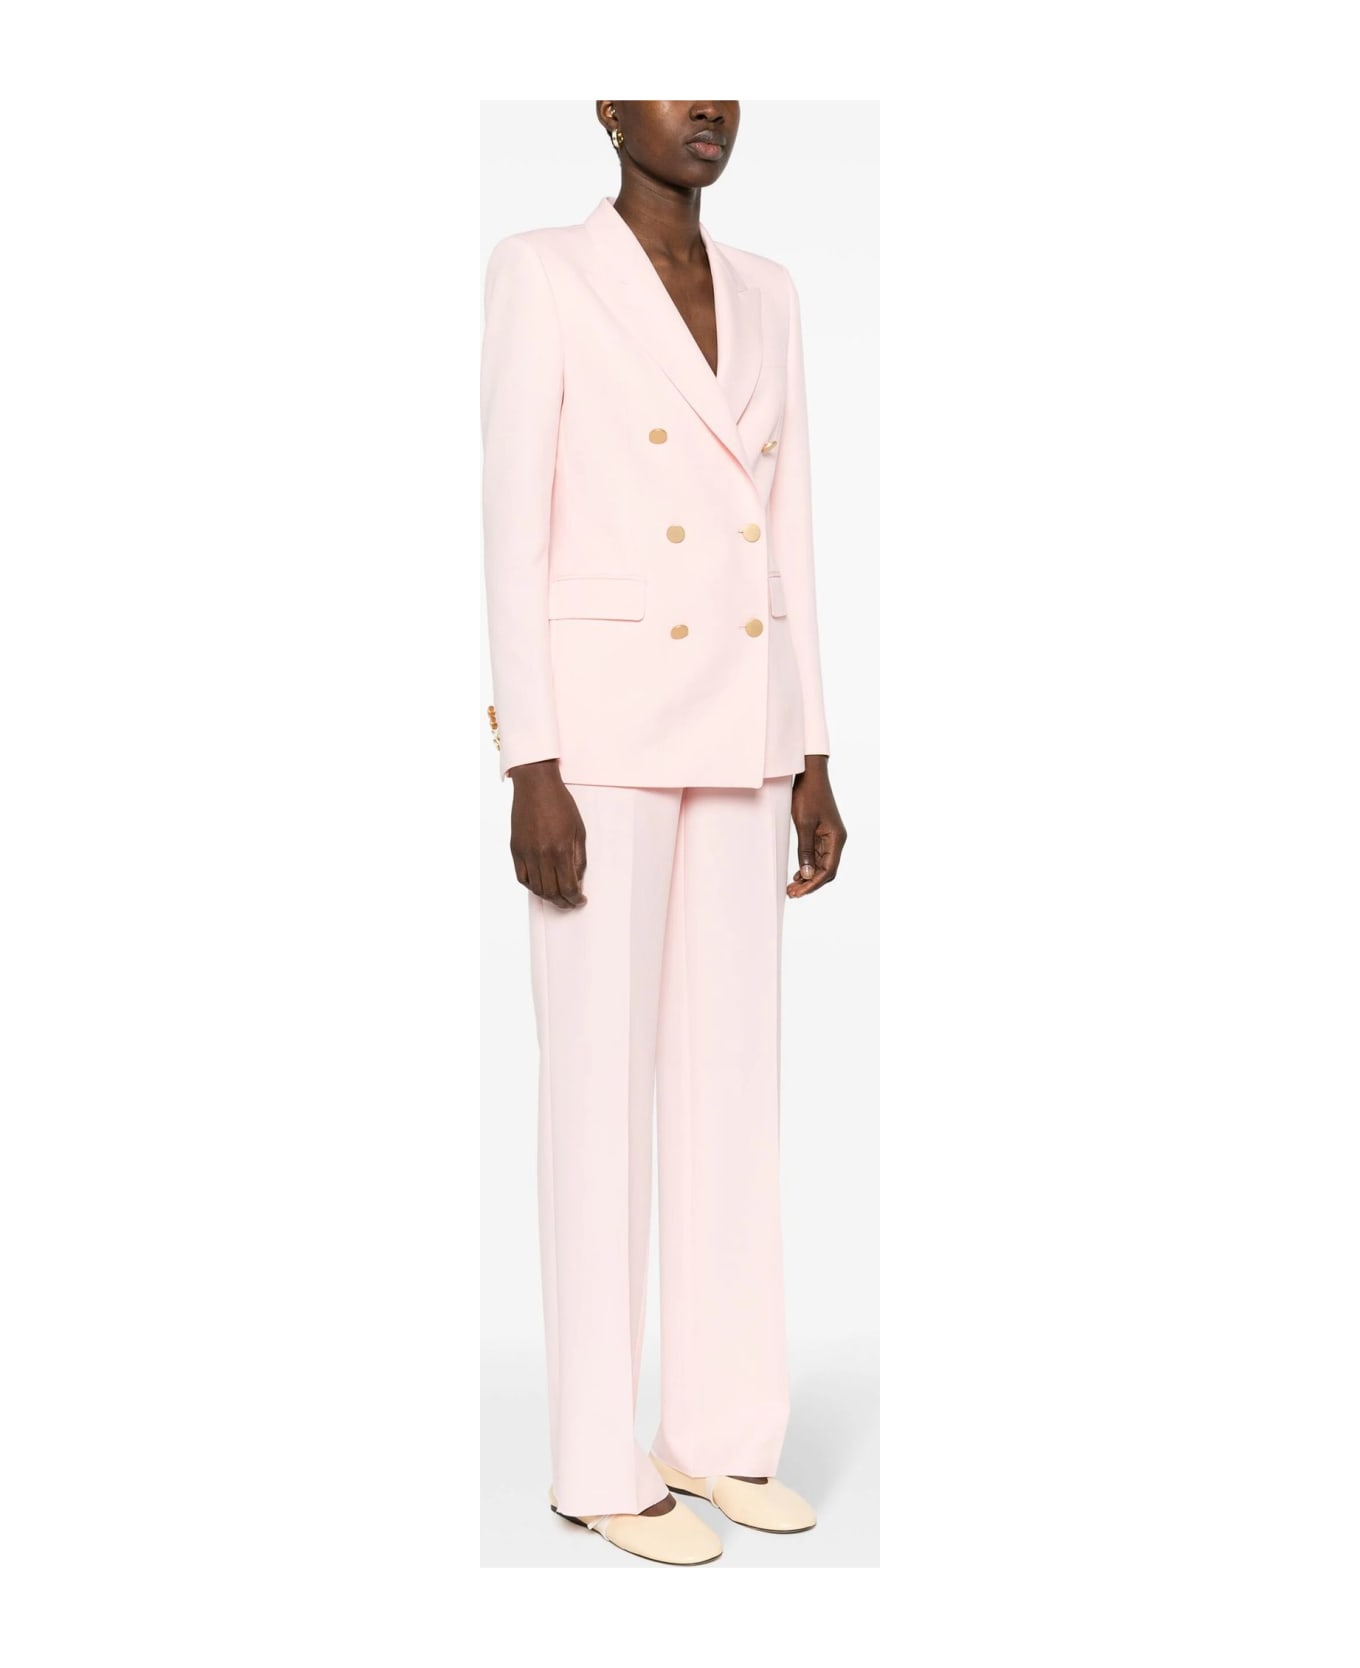 Tagliatore Pink Double-breasted Suit - Pink ブレザー